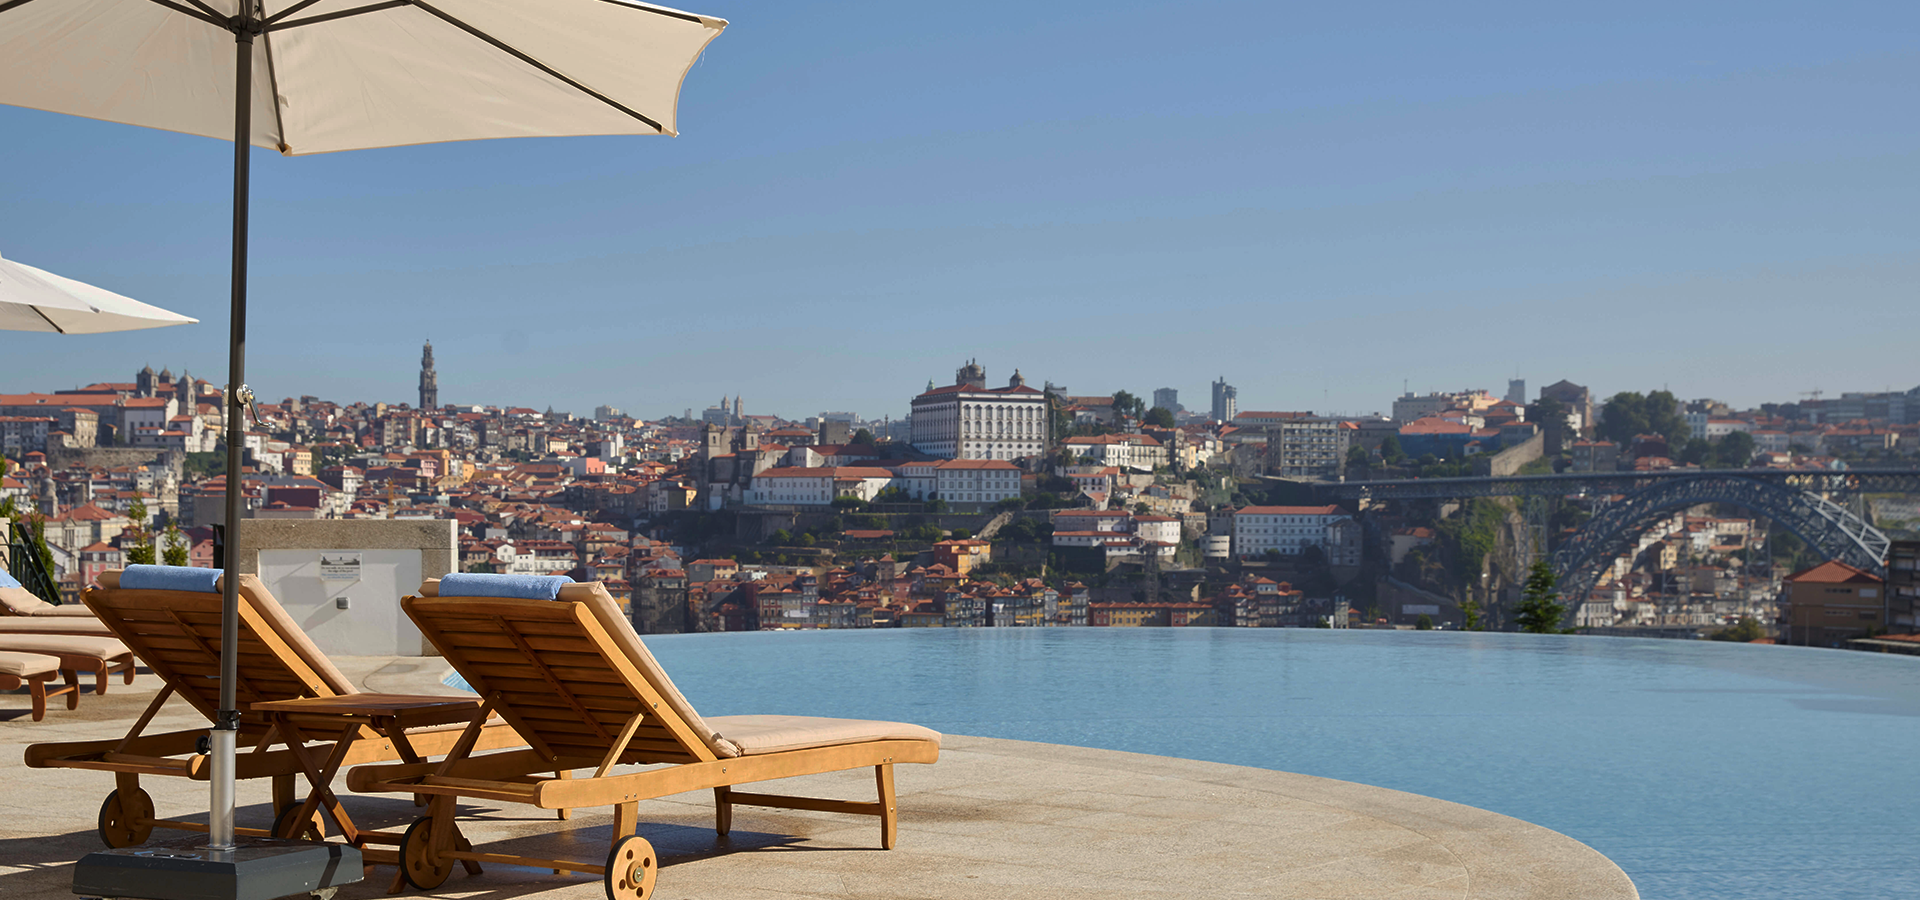 The Wine Hotels in Portugal that you Really Need to Know17